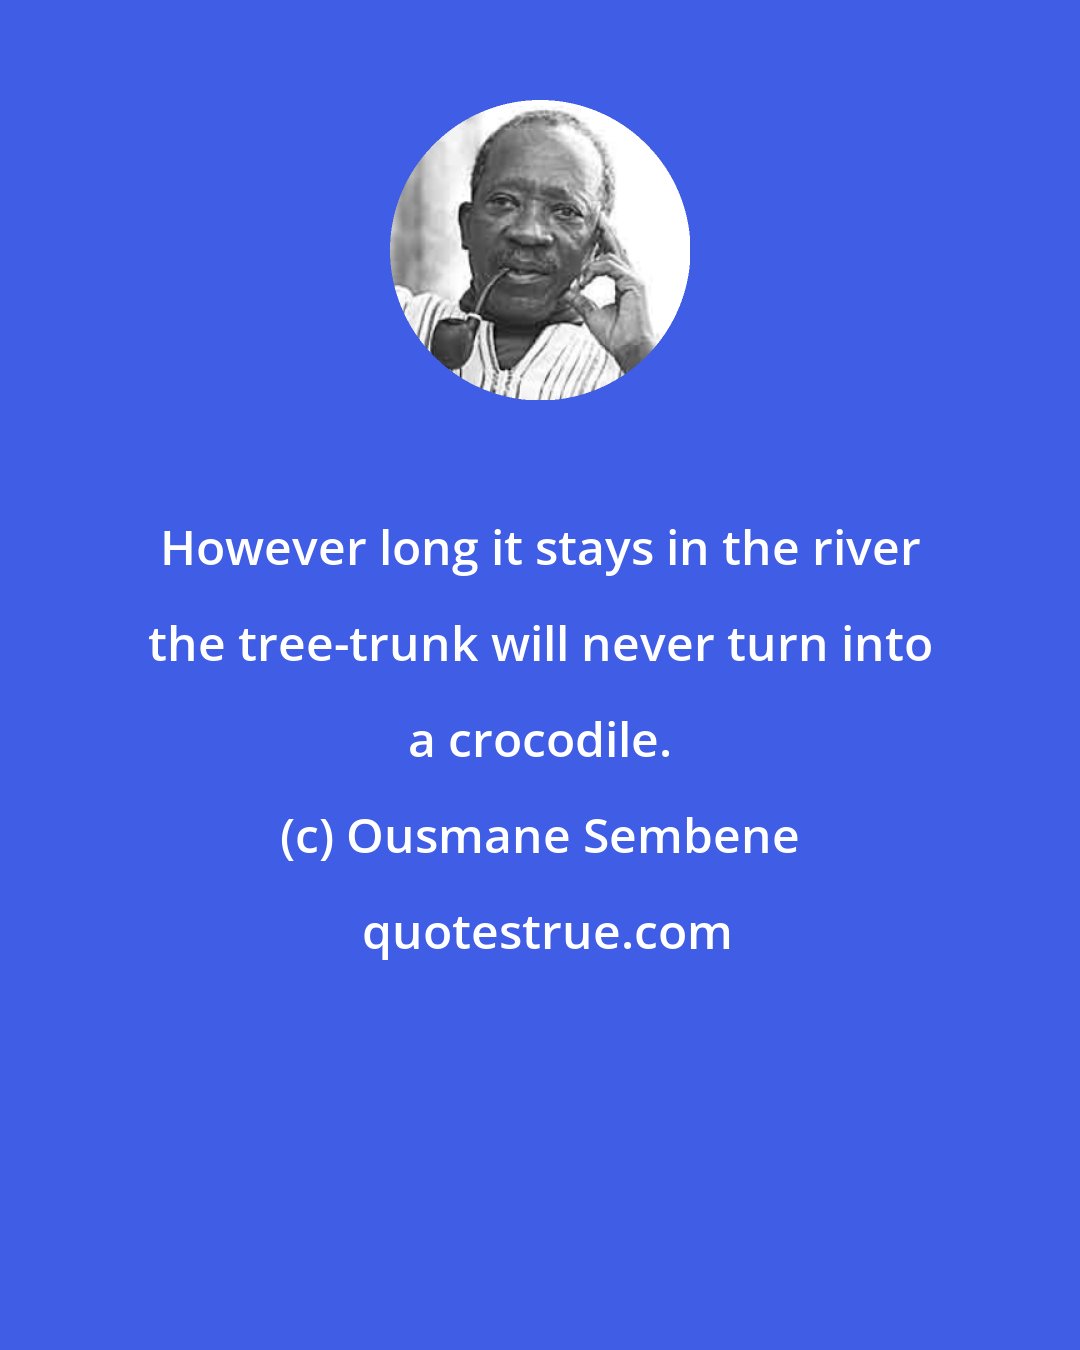 Ousmane Sembene: However long it stays in the river the tree-trunk will never turn into a crocodile.